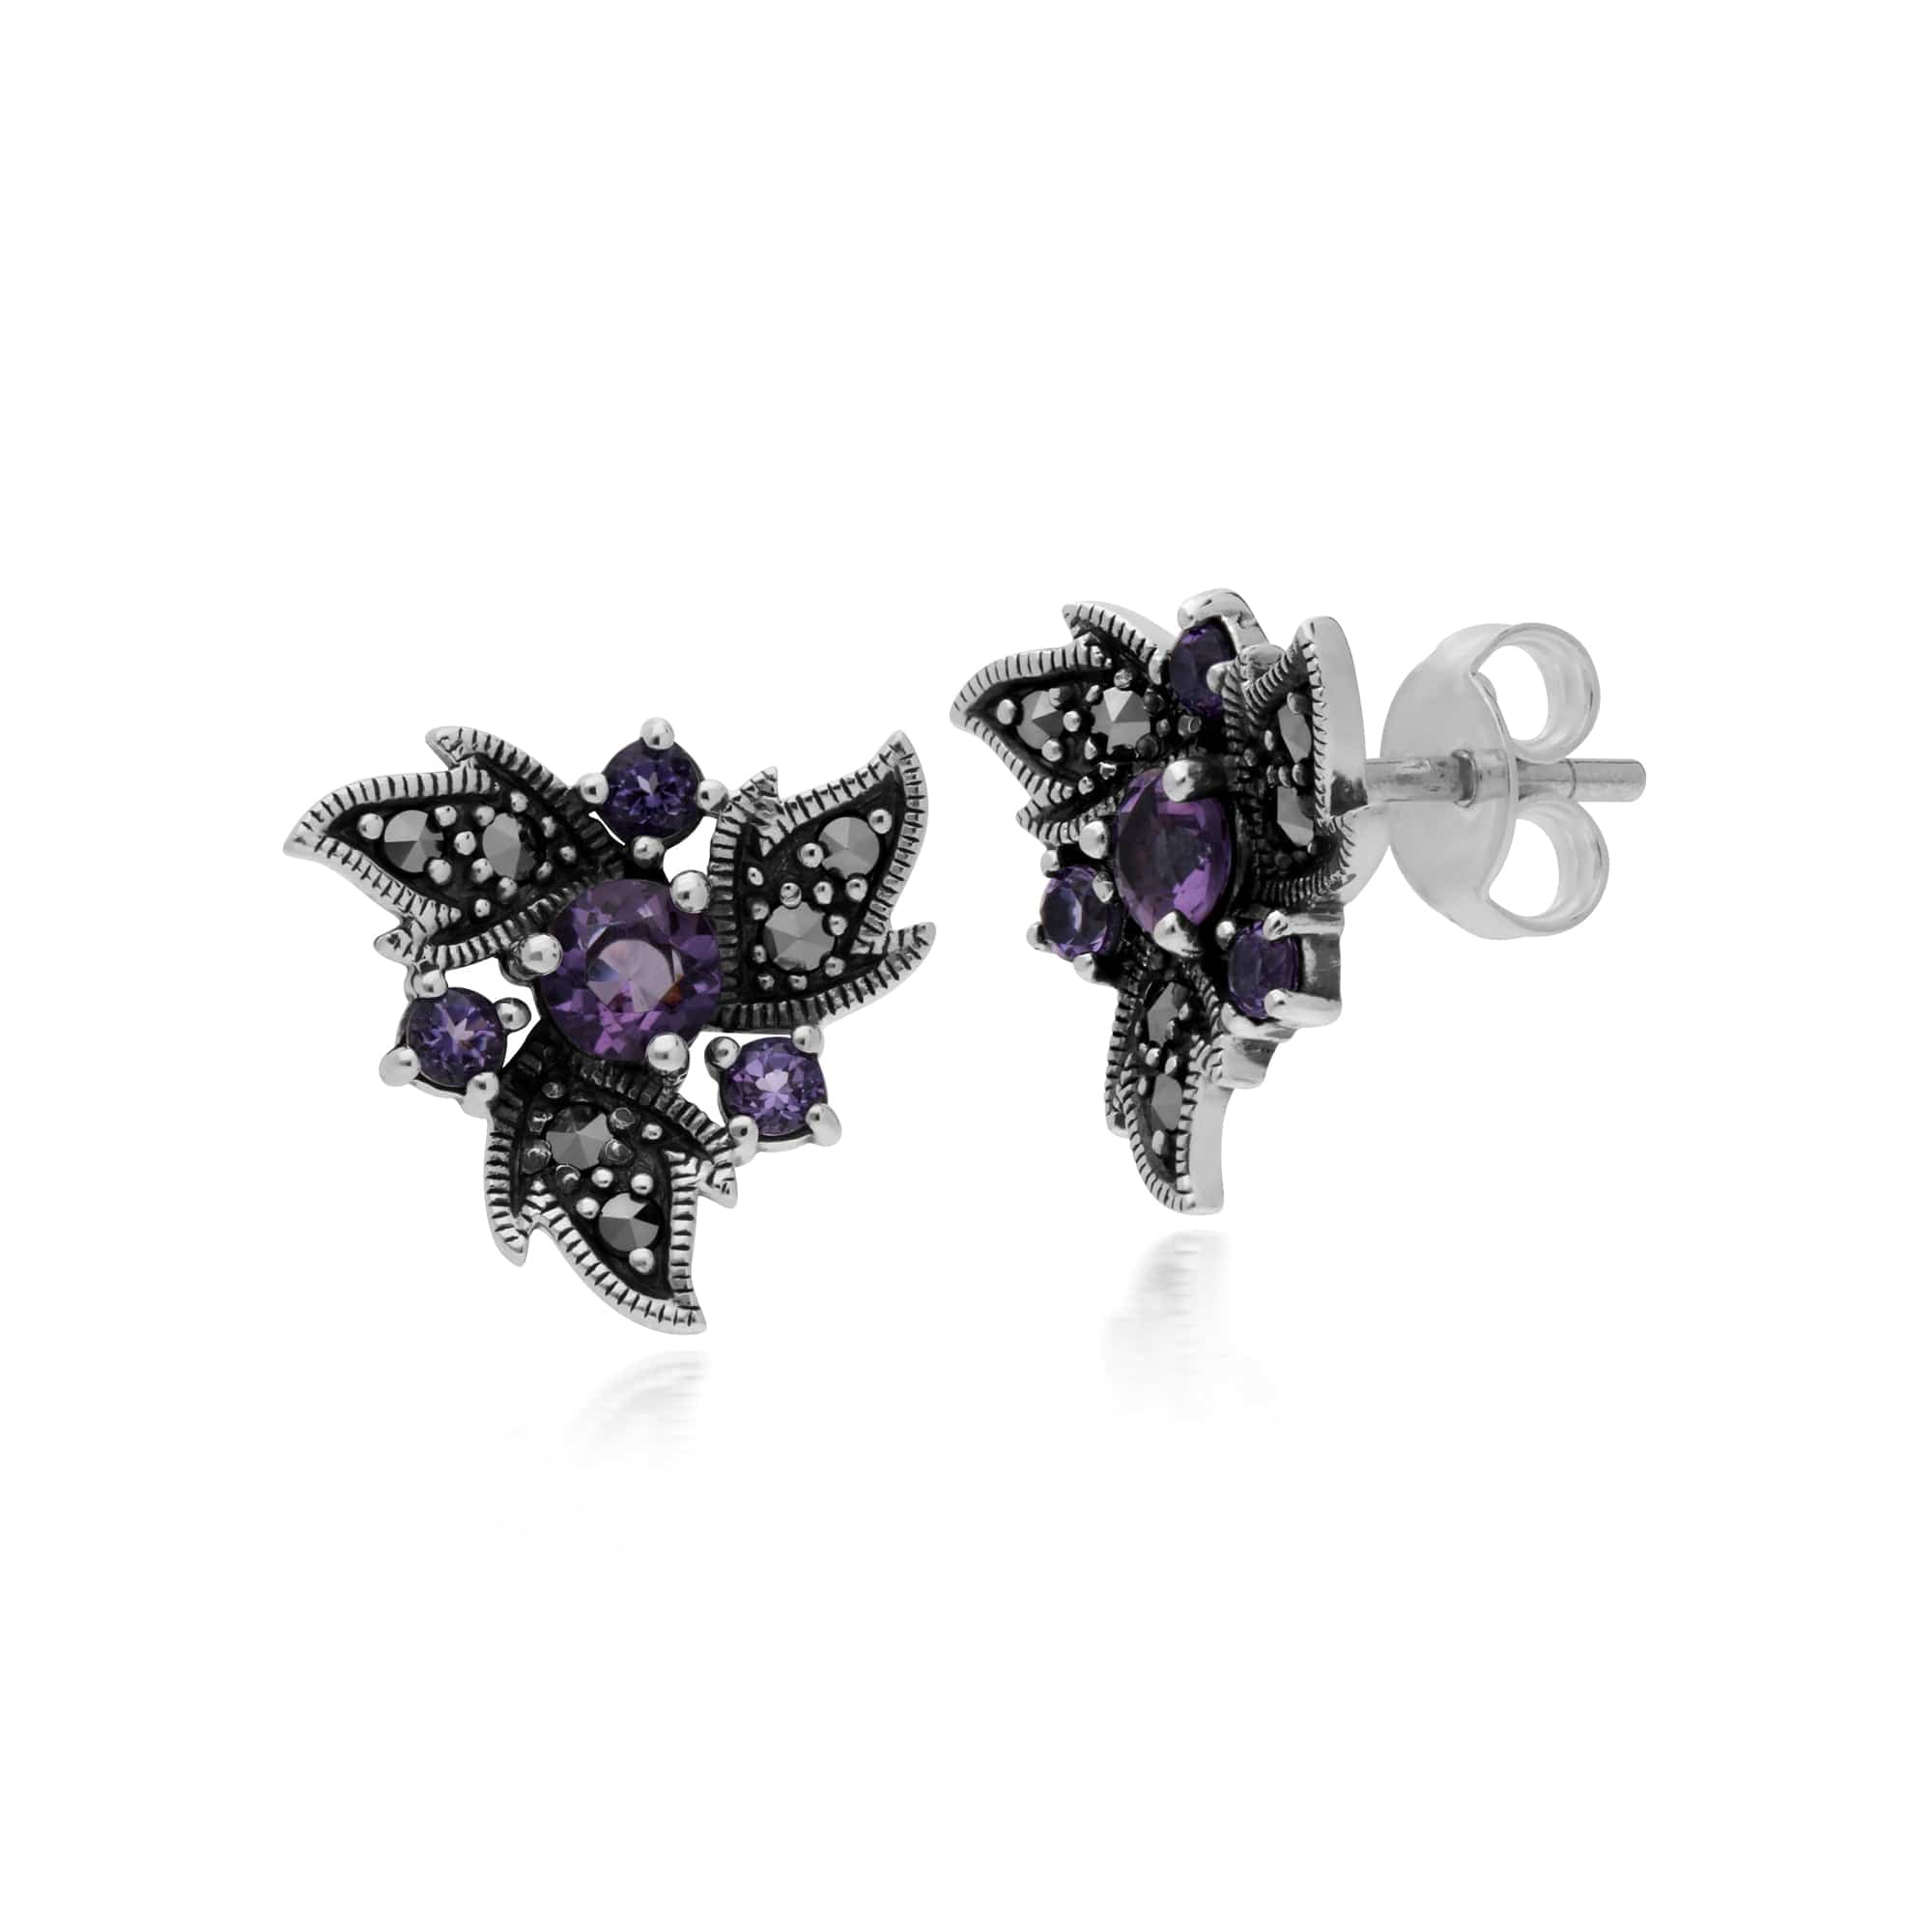 214E860402925 Art Nouveau Style Round Amethyst & Marcasite Floral Stud Earrings in 925 Sterling Silver 1